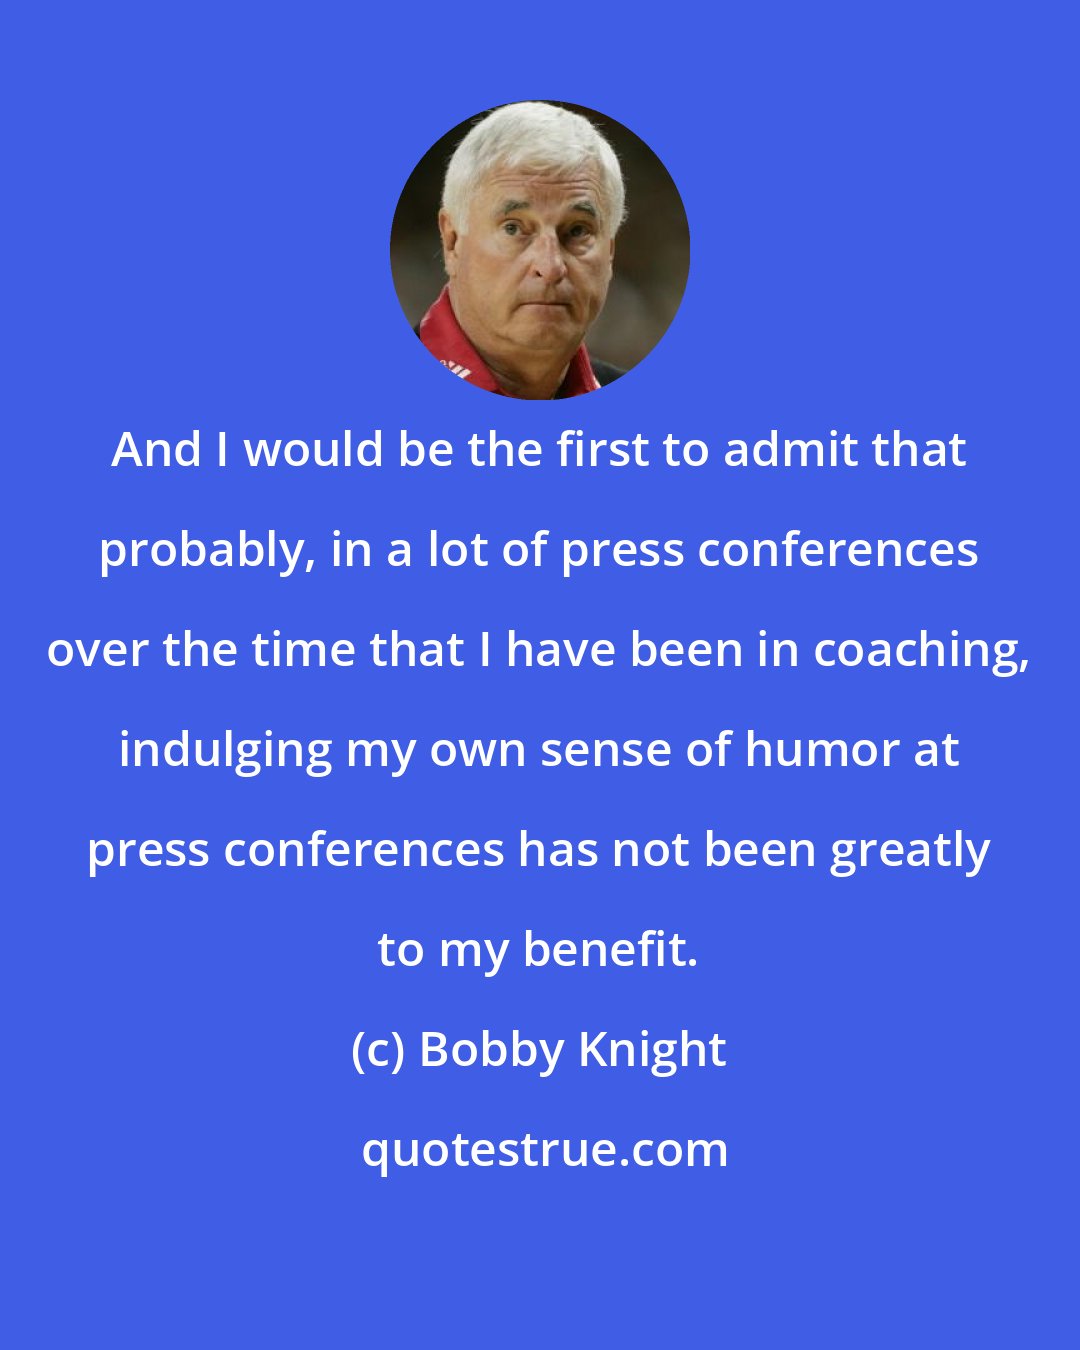 Bobby Knight: And I would be the first to admit that probably, in a lot of press conferences over the time that I have been in coaching, indulging my own sense of humor at press conferences has not been greatly to my benefit.